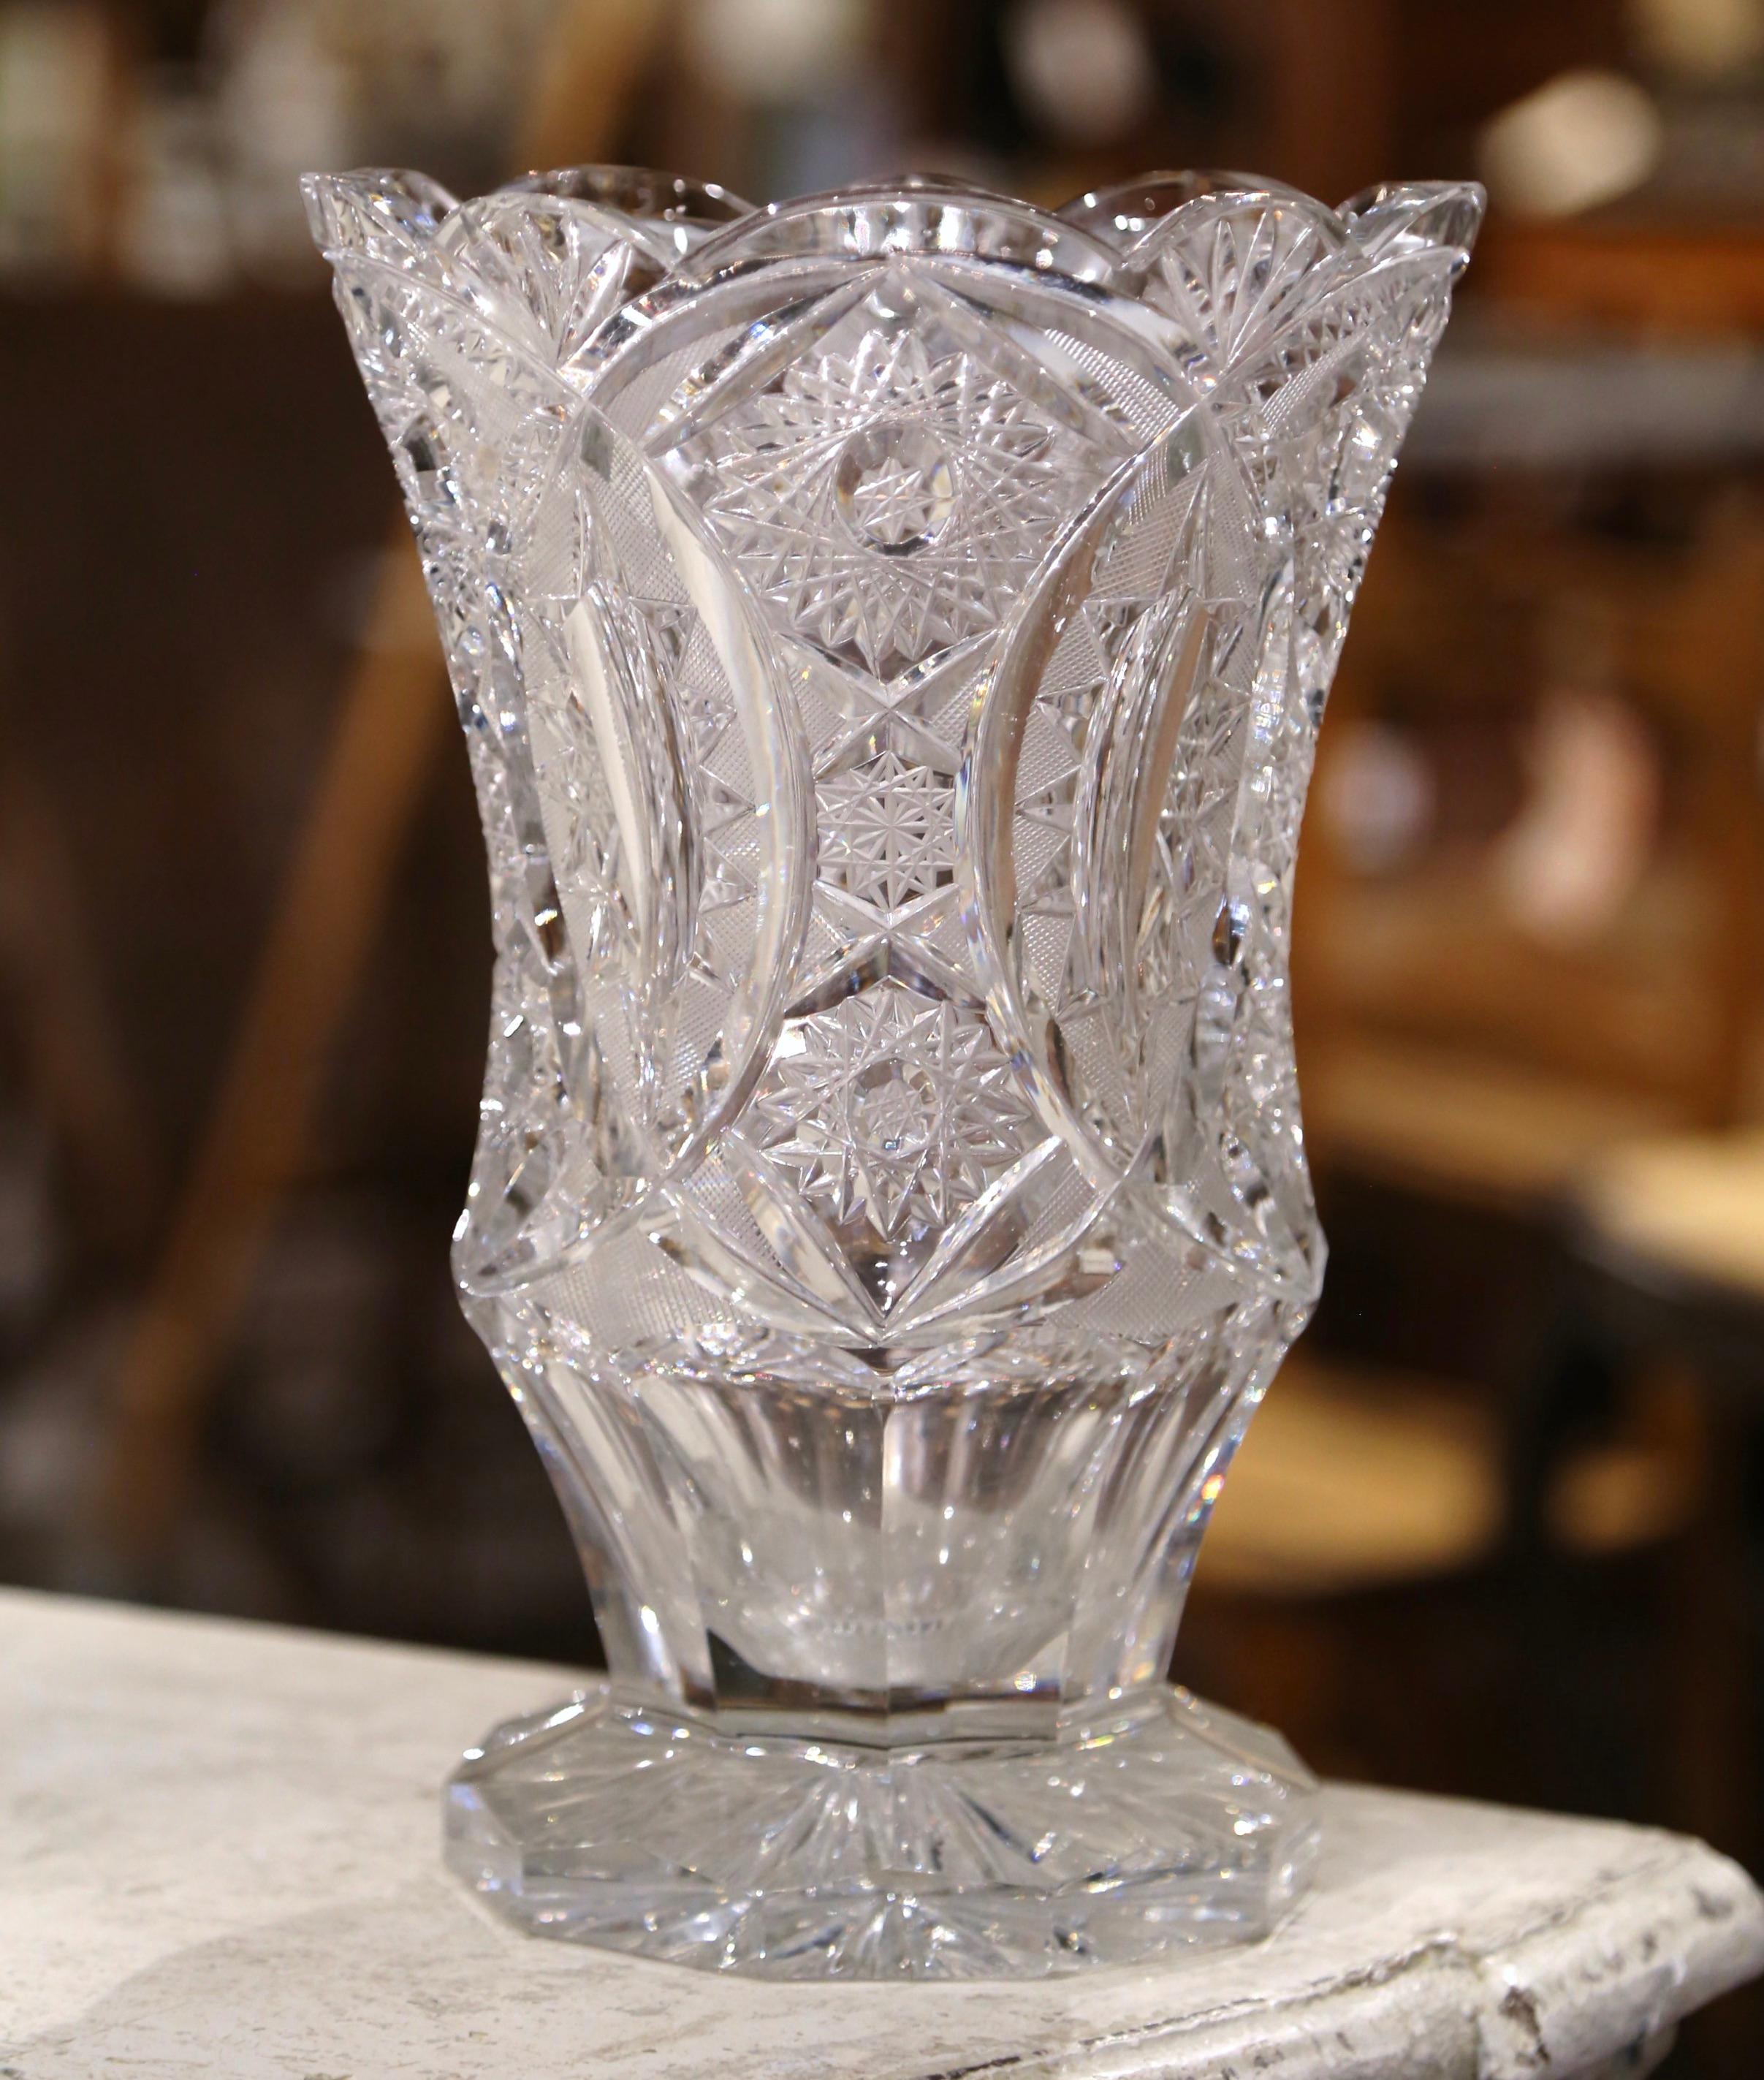 Decorate a side table or enfilade with this elegant antique vase. Crafted in France circa 1960, the tall neoclassical vase sits on a octagonal base and embellished with a wide mouth at the top. The Classic, cut crystal vase is decorated with a